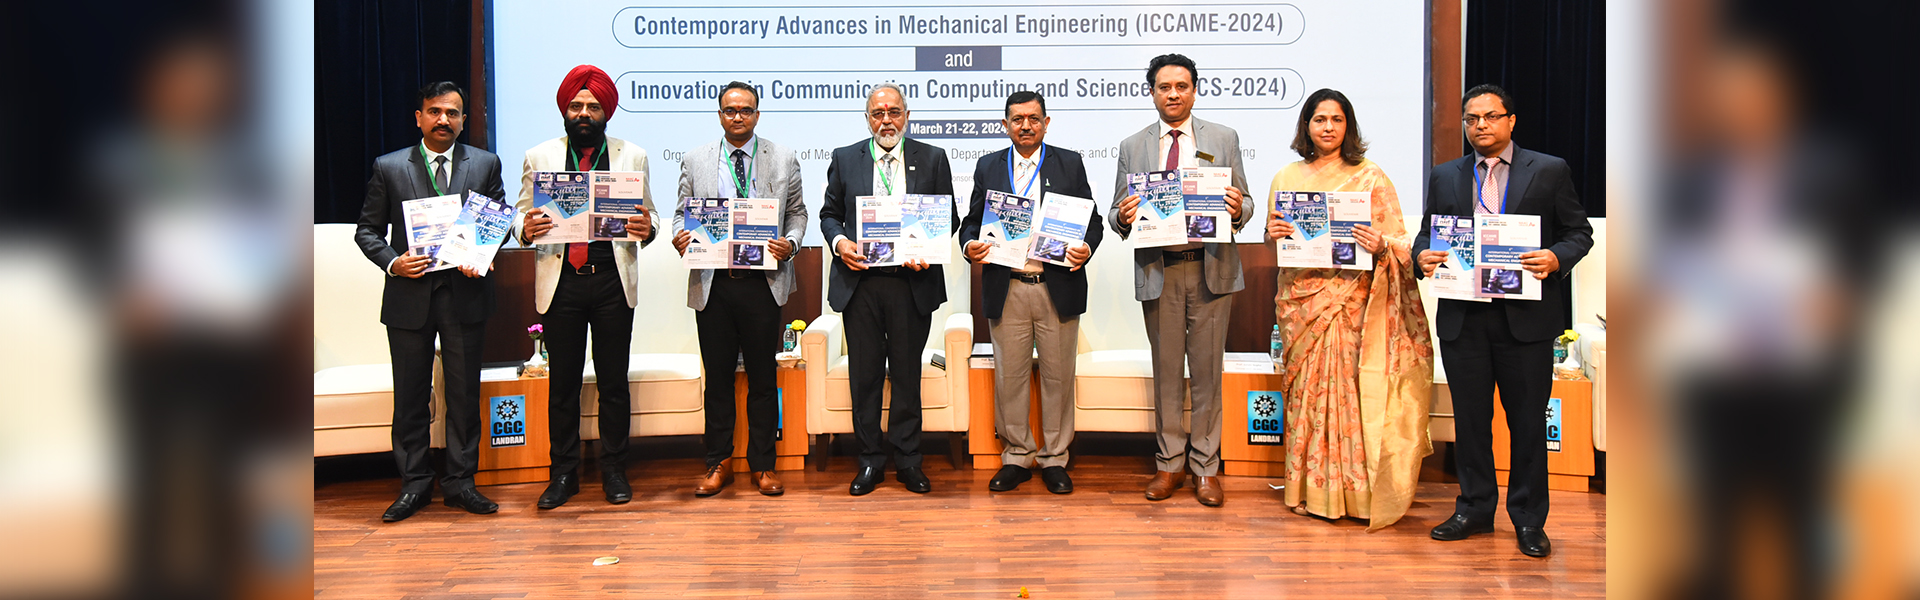 5th International Conference on Contemporary Advances in Mechanical Engineering (ICCAME-2024) 